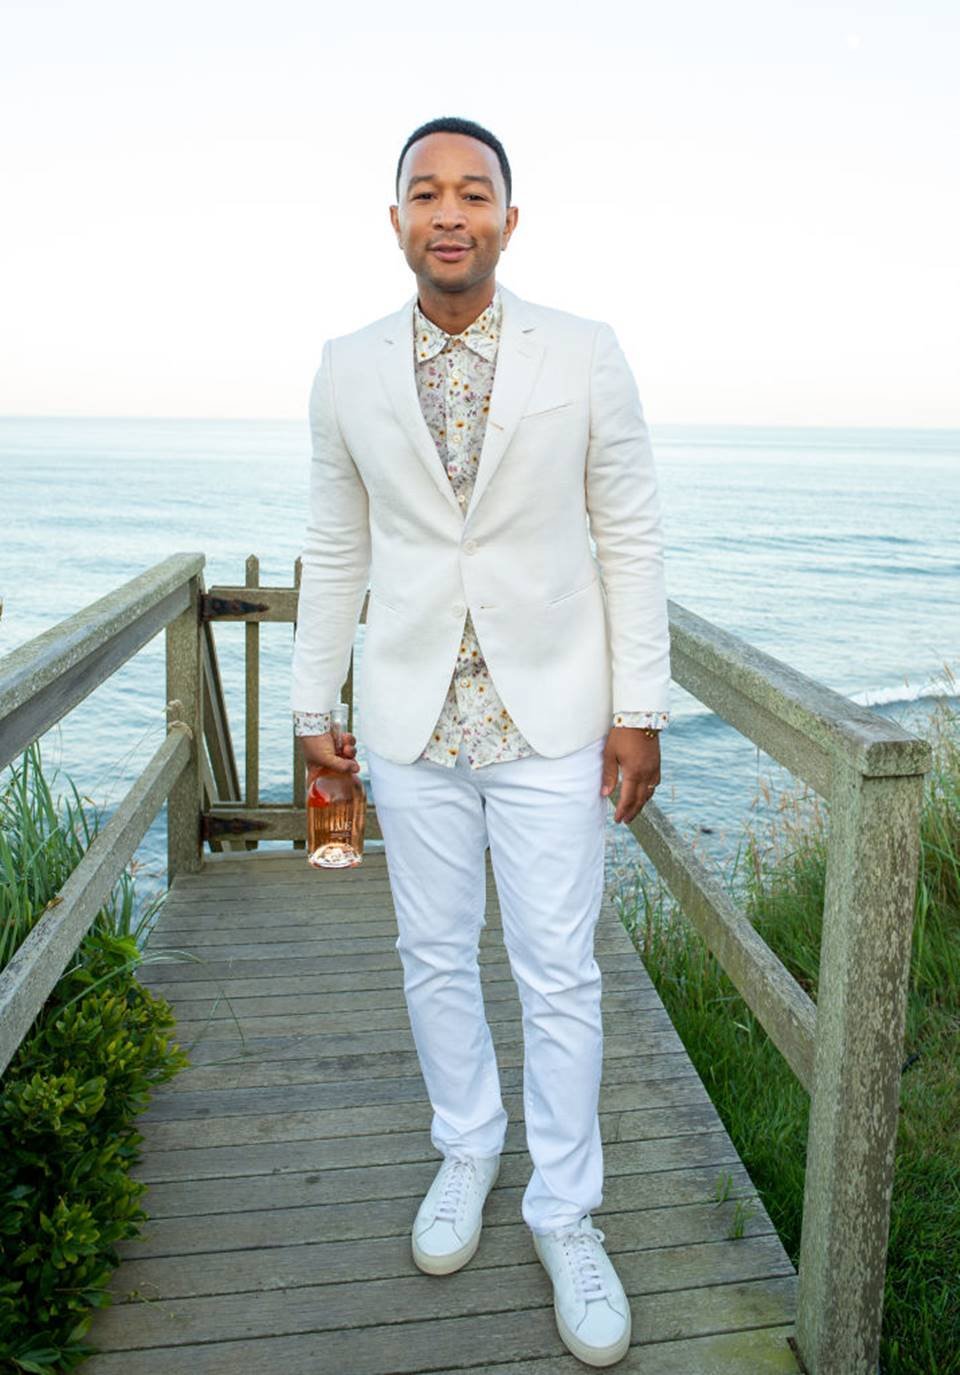 Mark Sagliocco/Getty Images for Hamptons Magazine